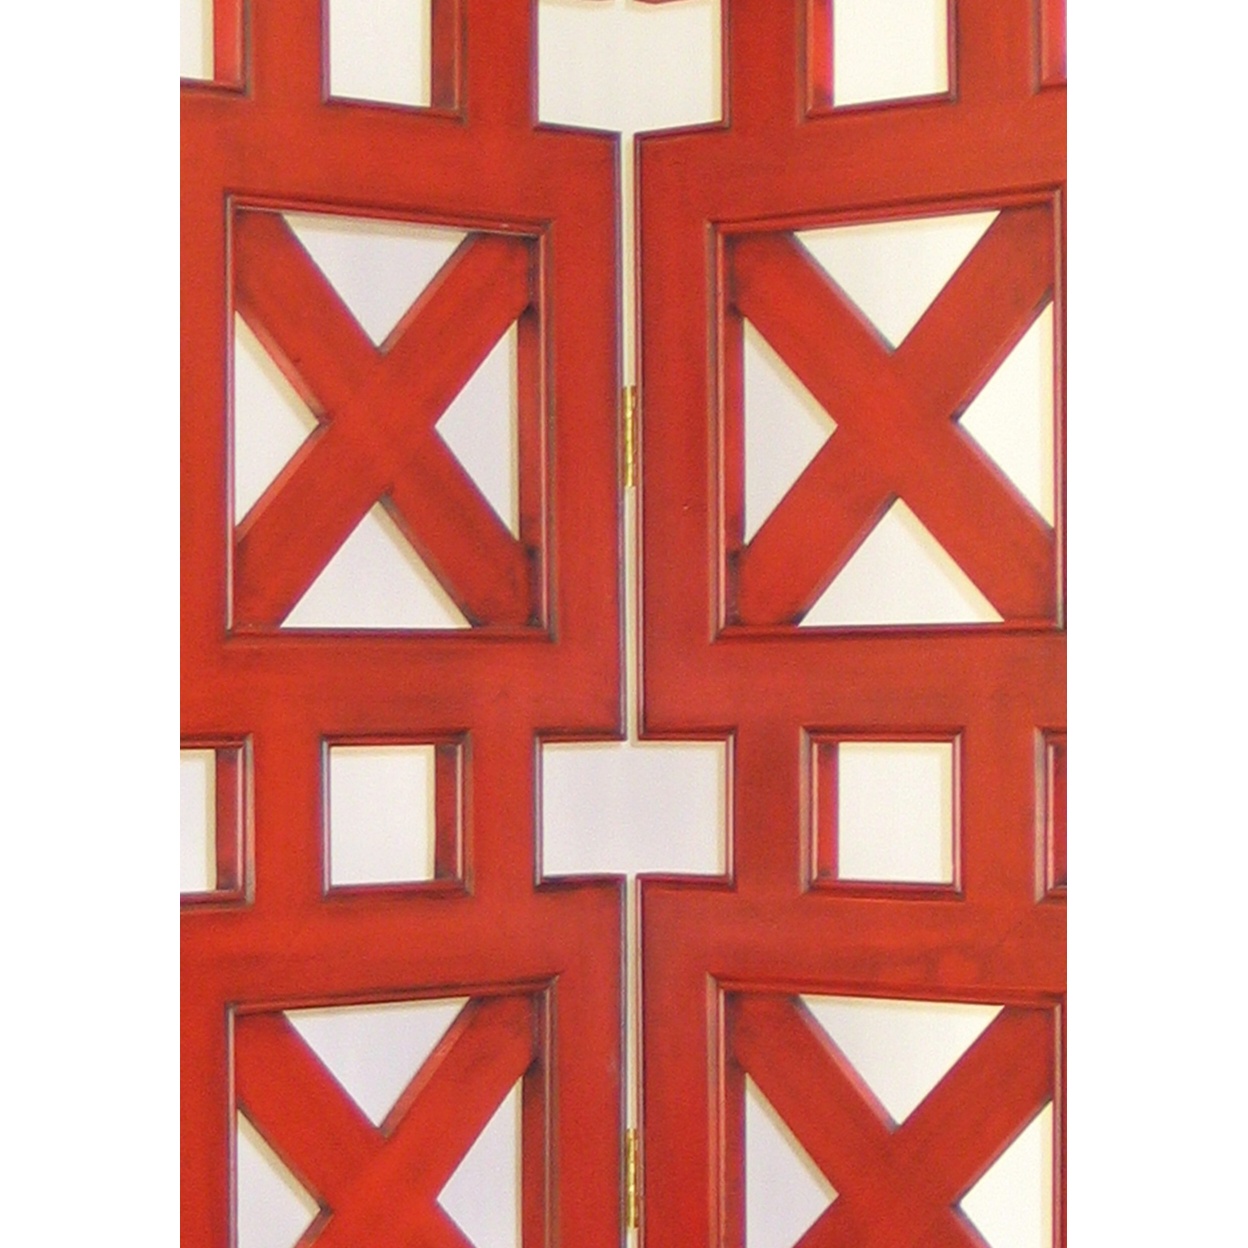 3 Panel Screen With X Shaped Design In Square Cut Out, Red- Saltoro Sherpi